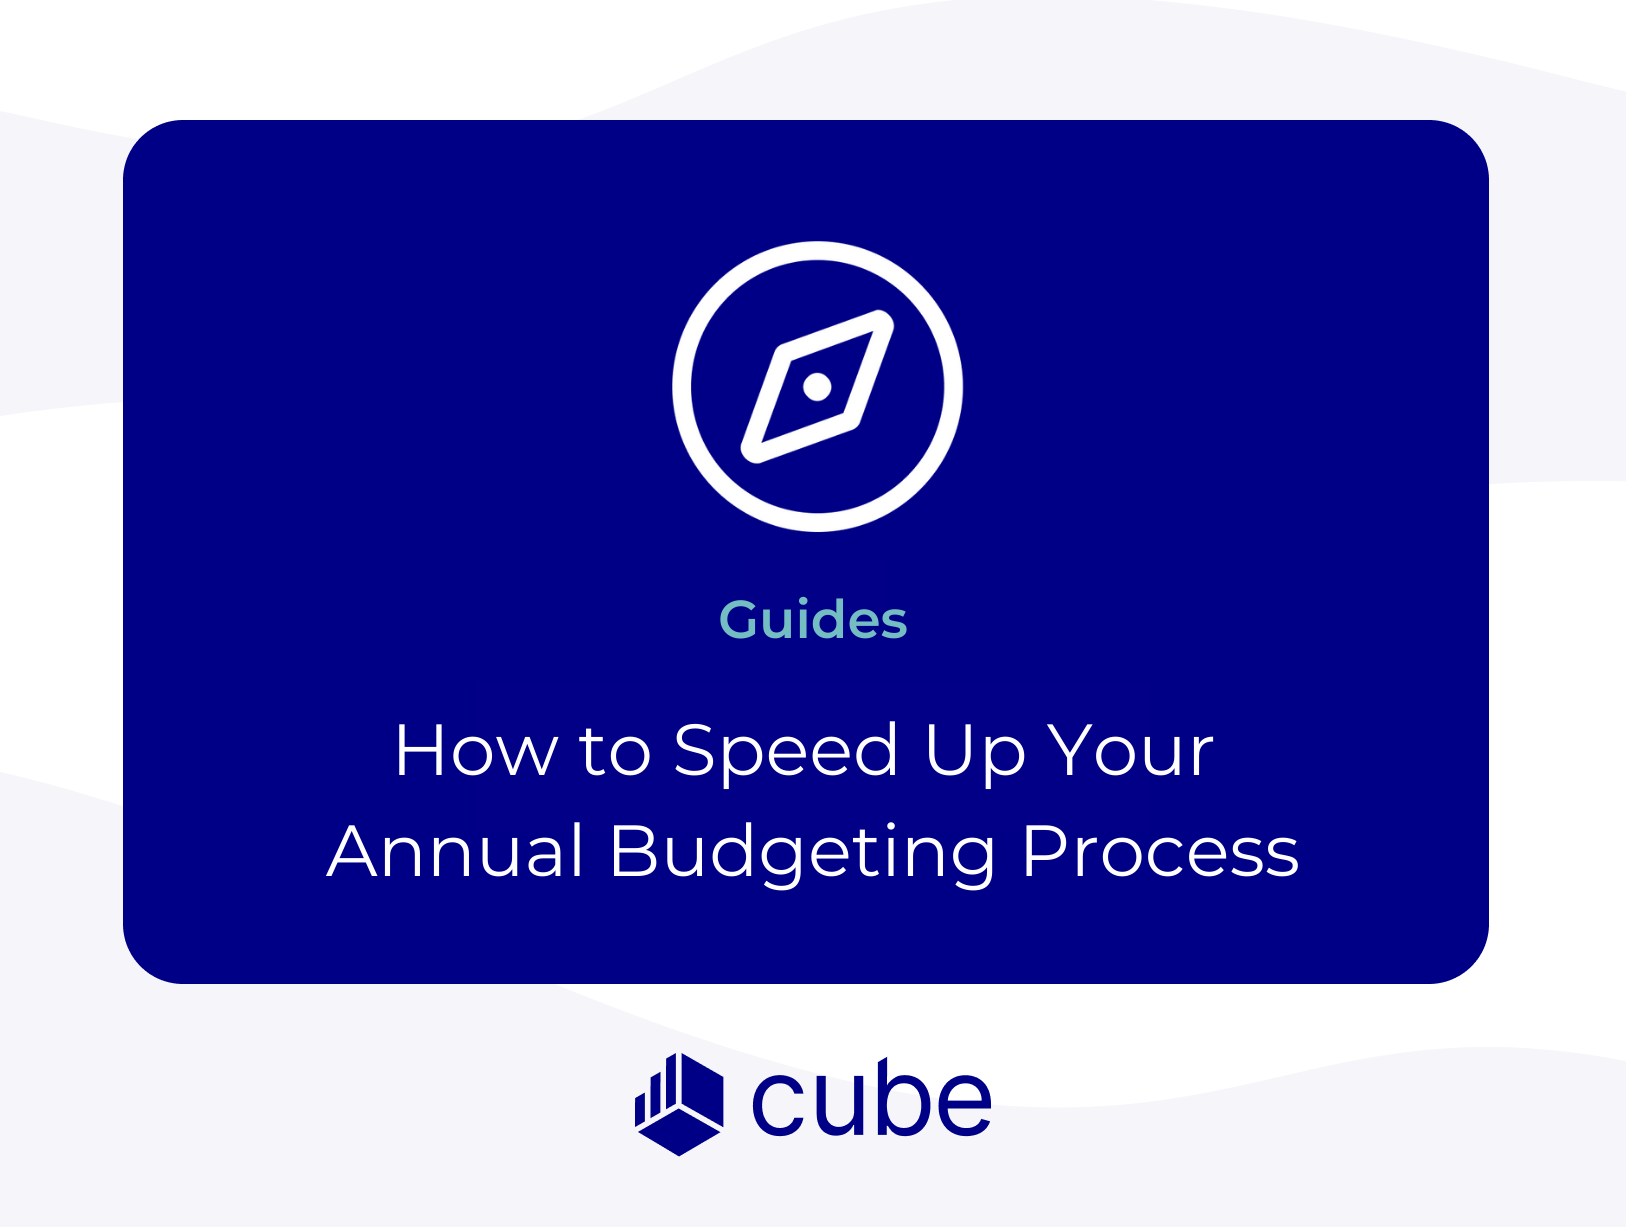 How to Speed Up your Annual Budgeting Process in 2022